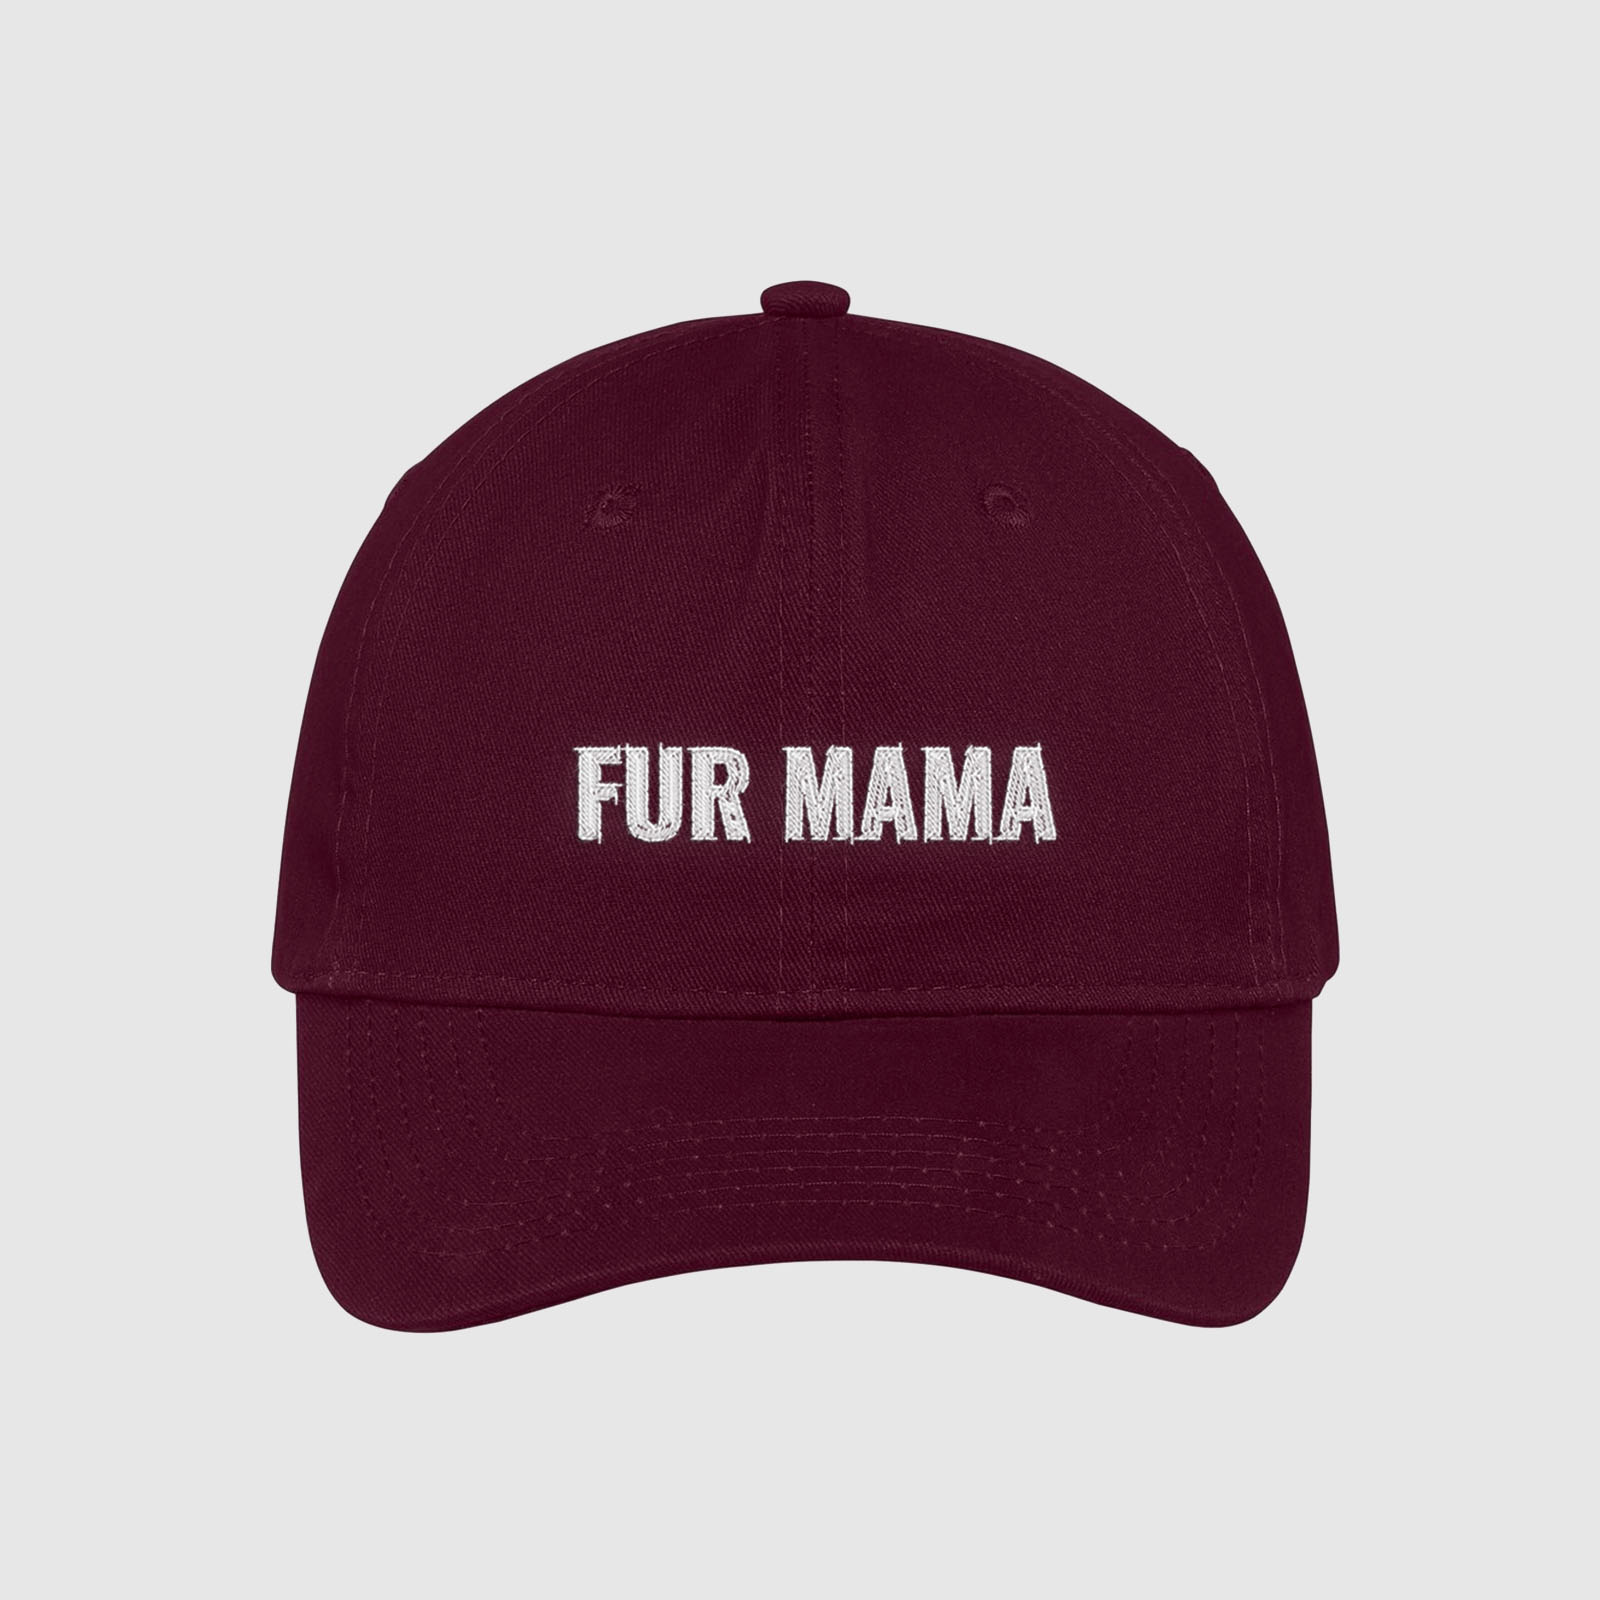 Maroon Fur Mama dad Hat for dog moms embroidered with white text.